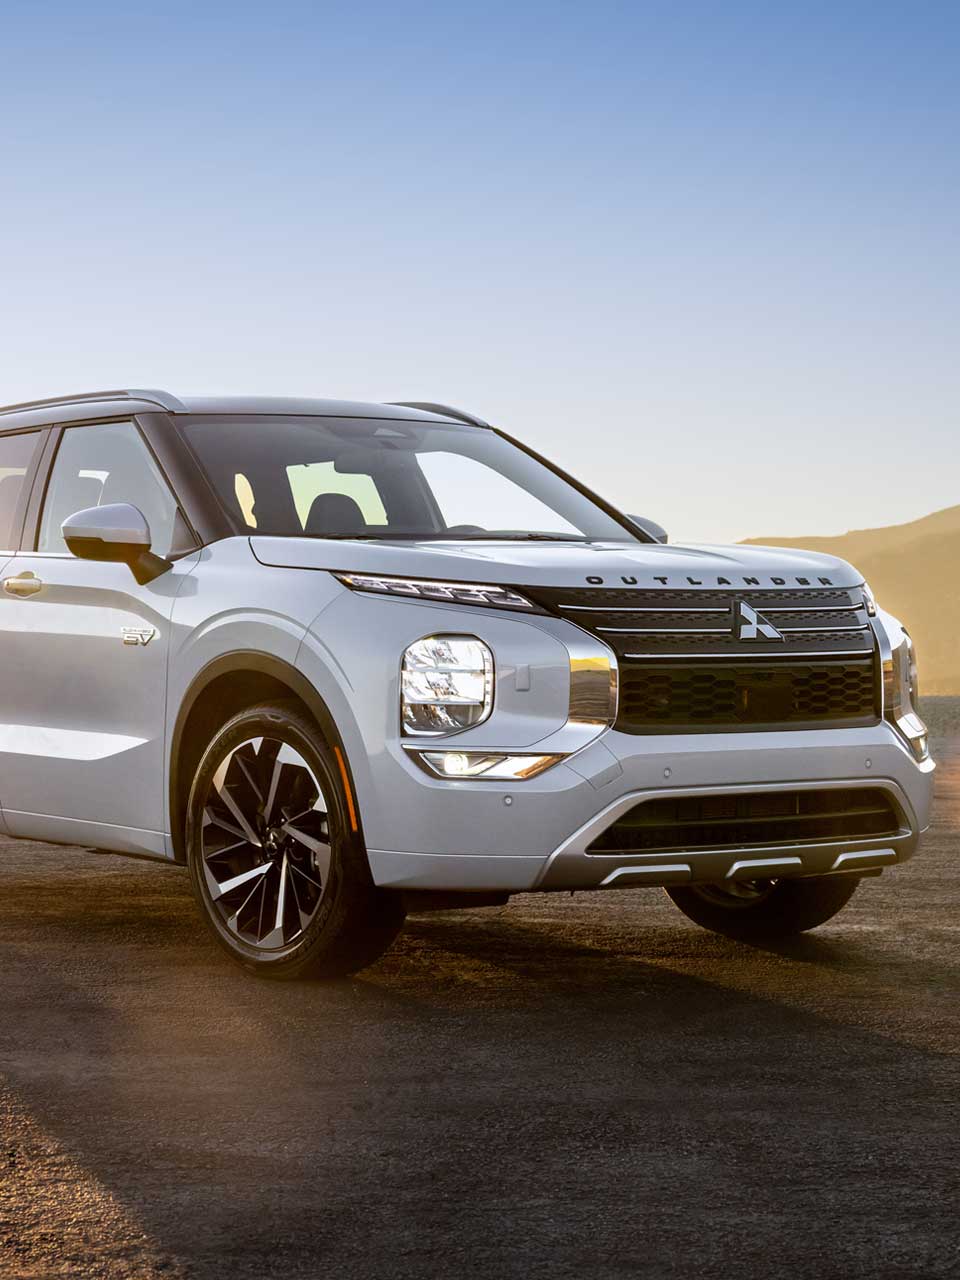 Mitsubishi Is Expected To Update Outlander PHEV In The U.S.